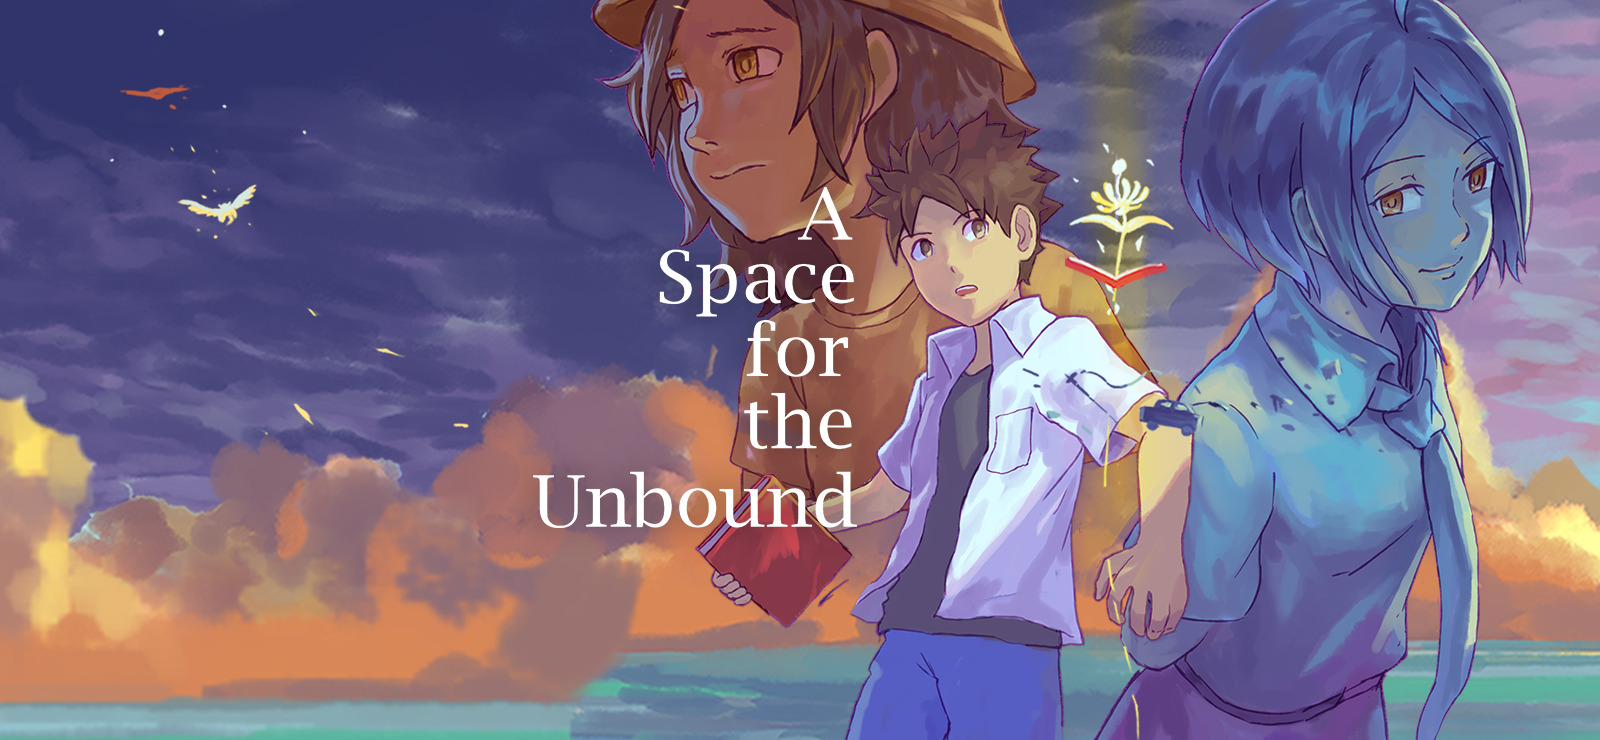 A Space for the Unbound on 